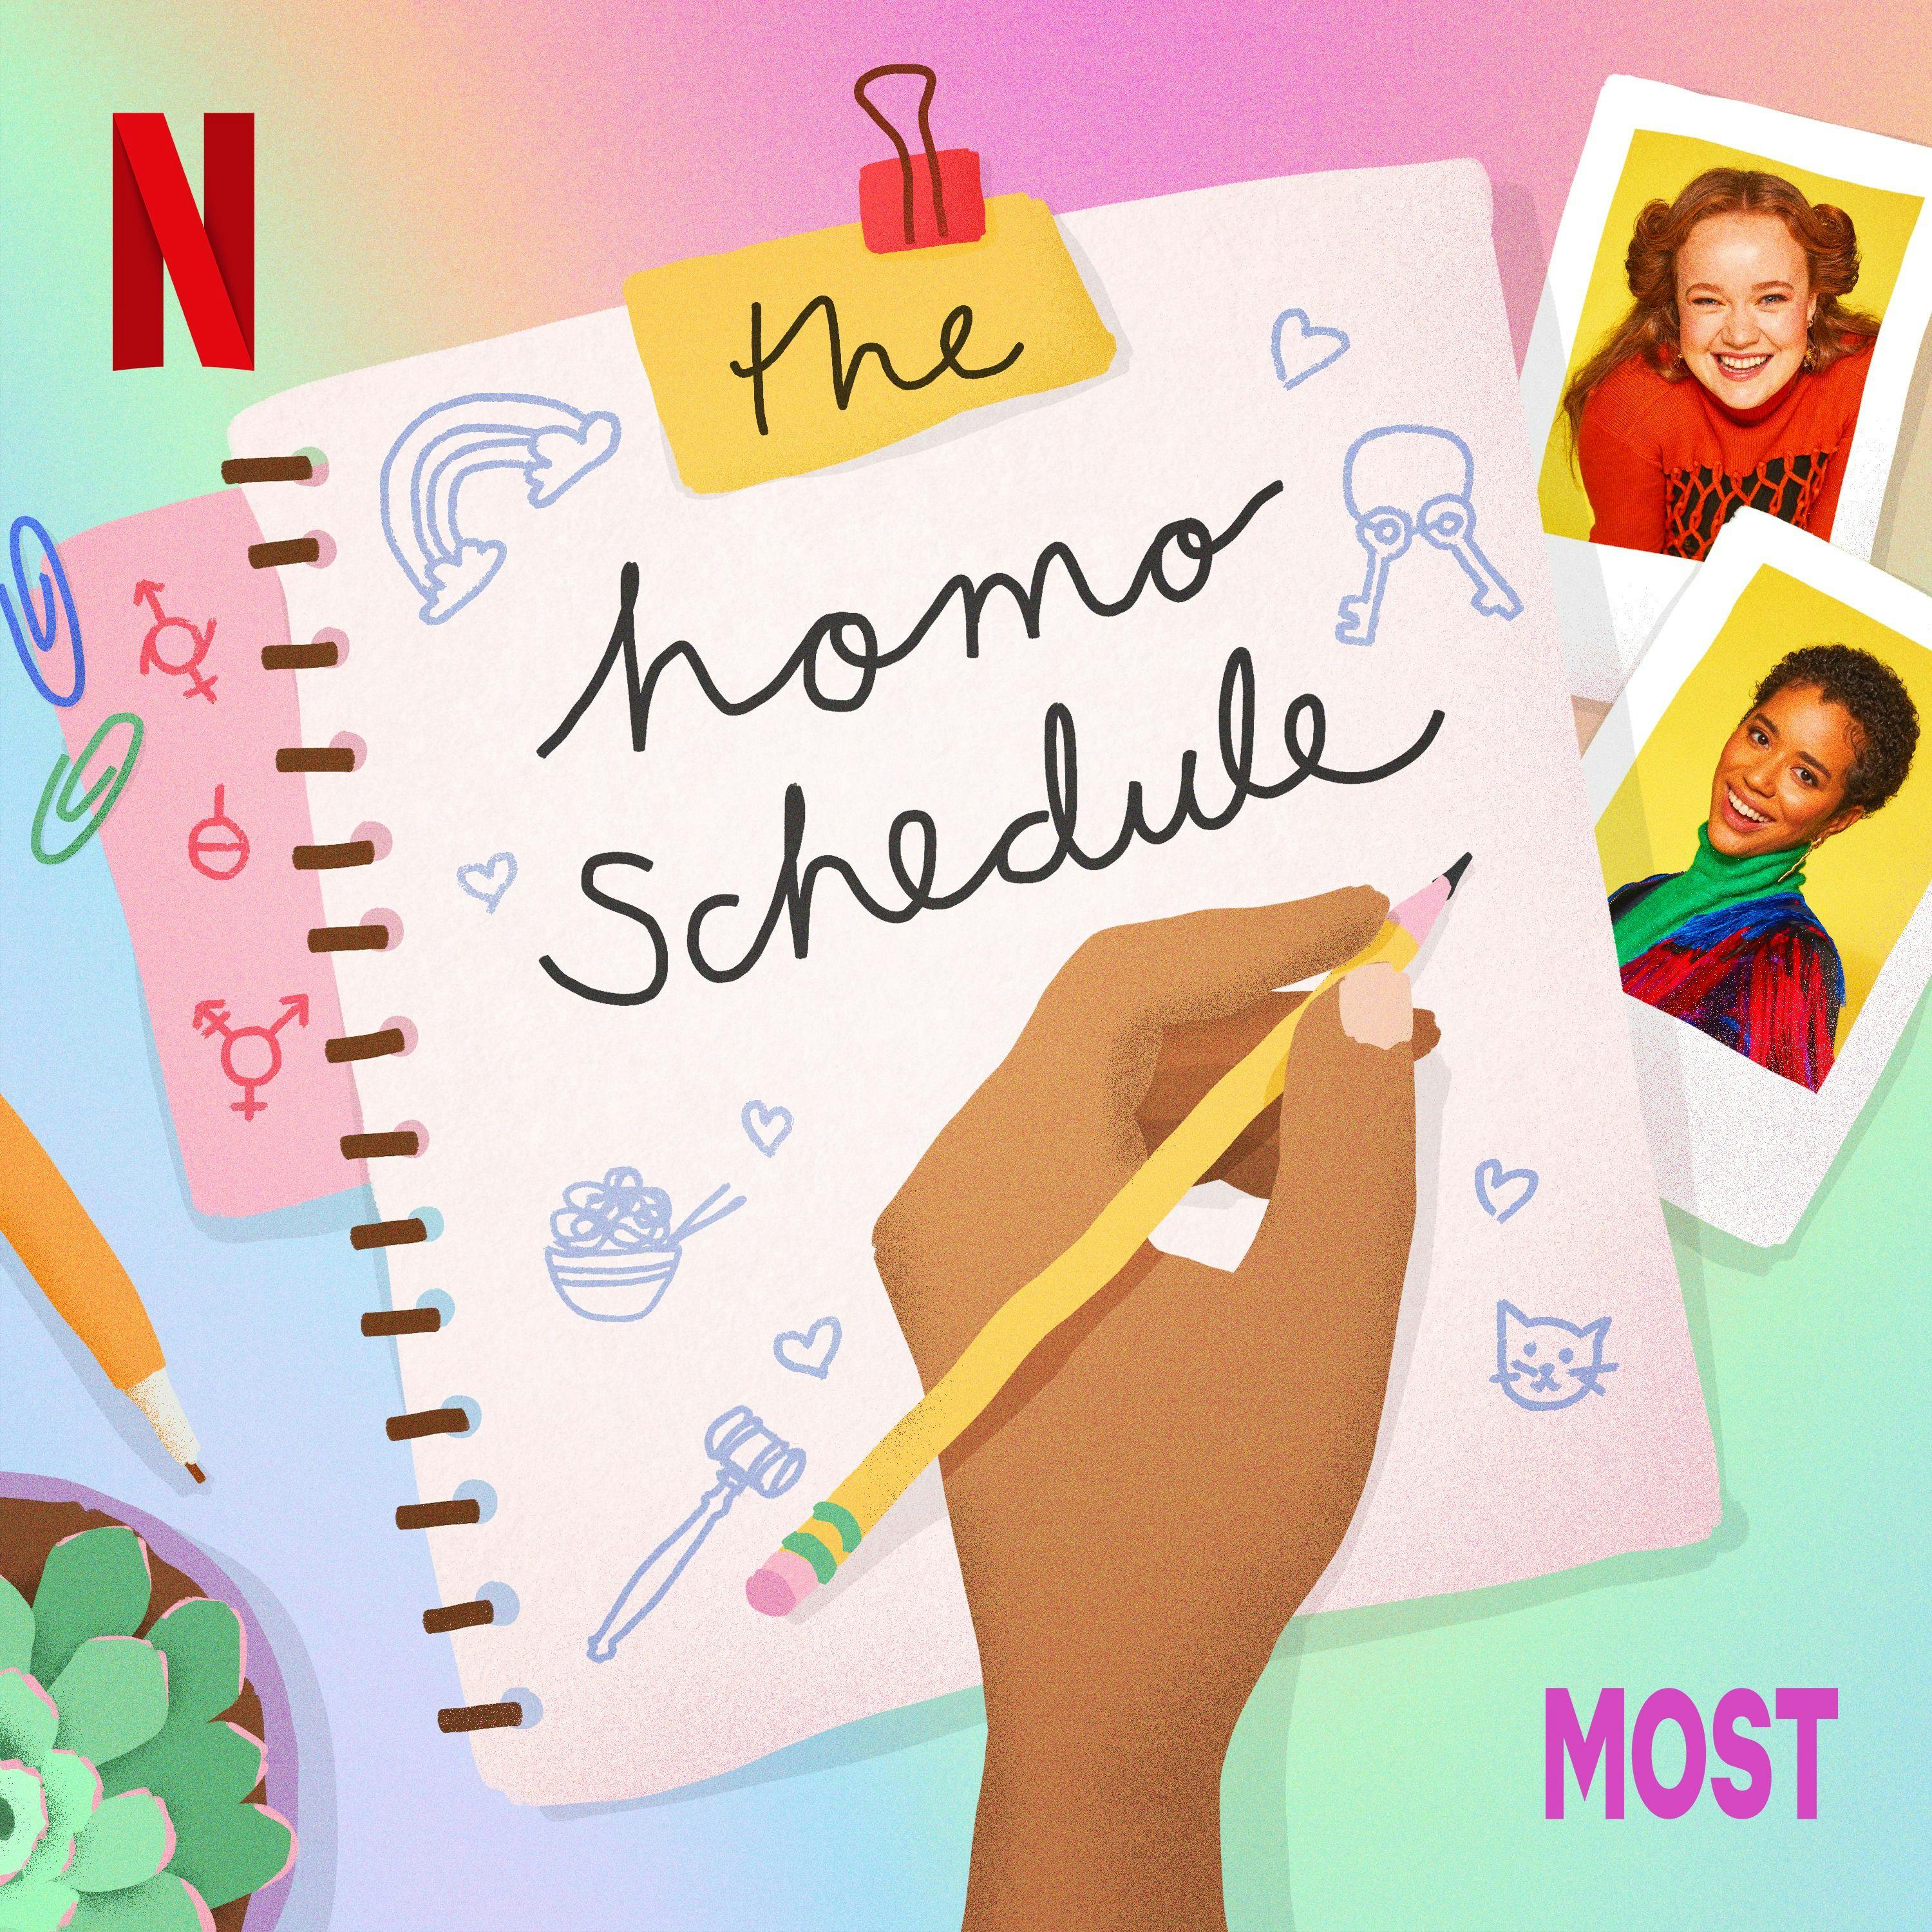 Introducing: The Homo Schedule